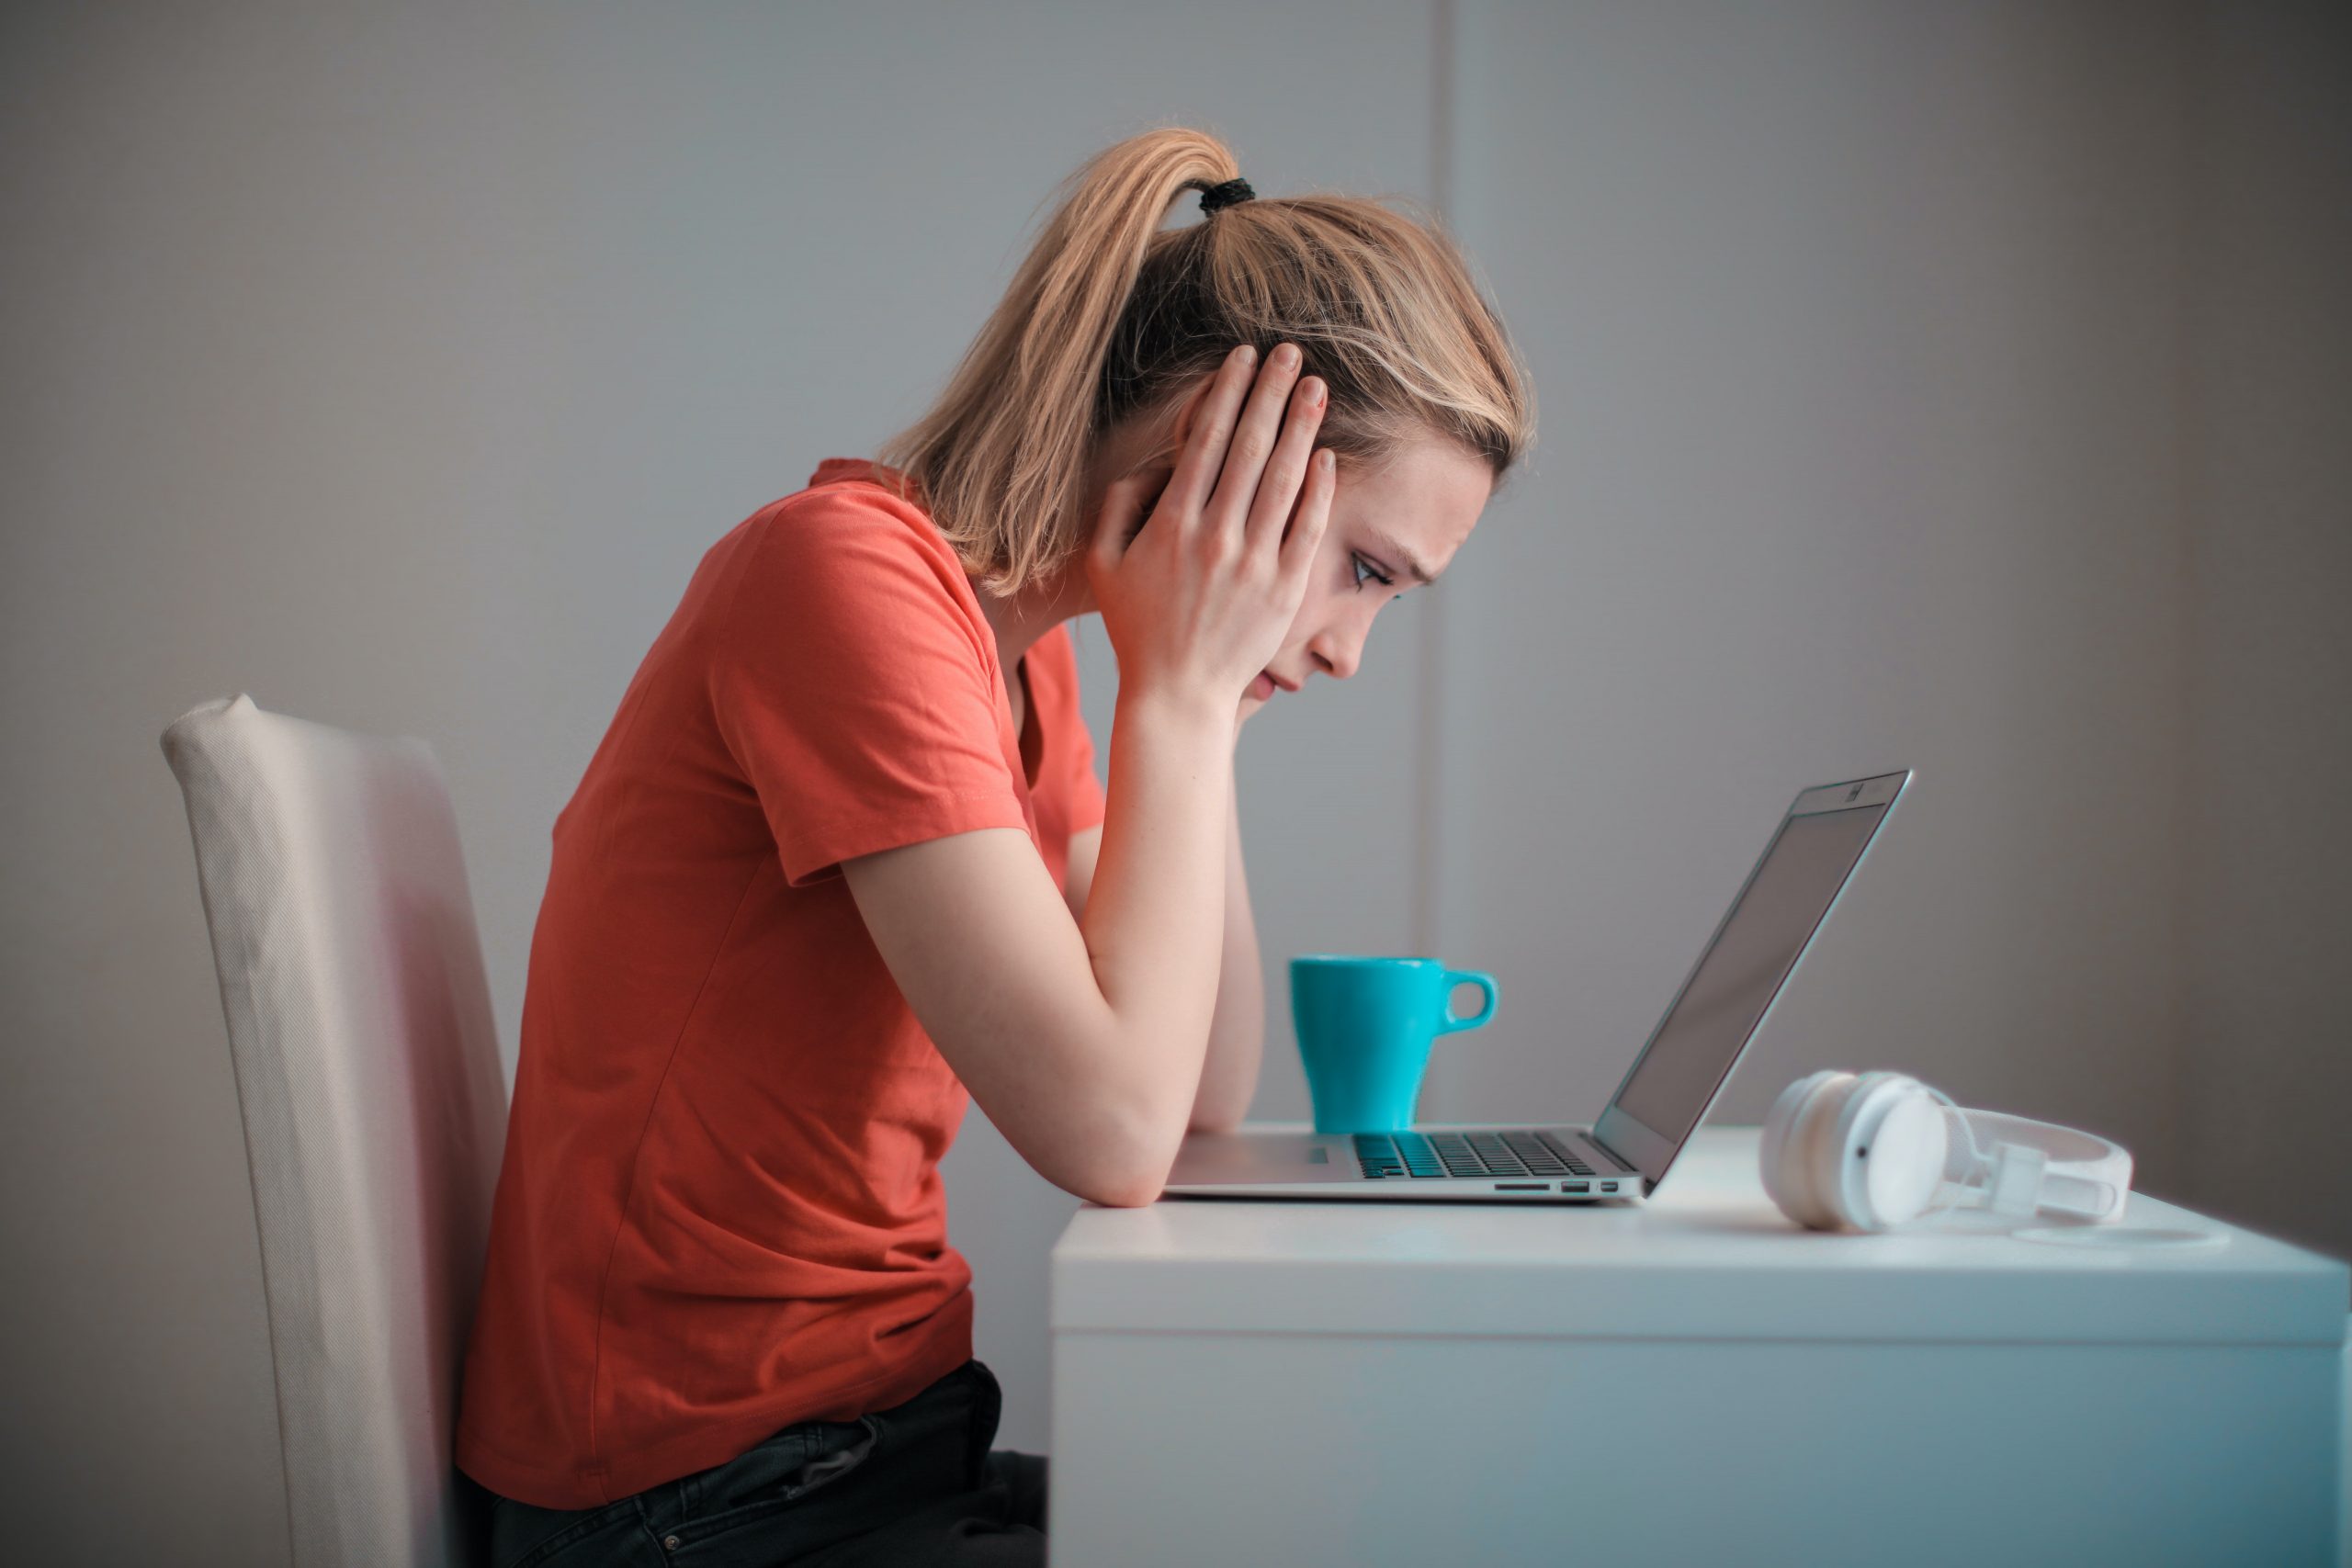 A stressed woman stares are her laptop screen. Her face is held in her hands.